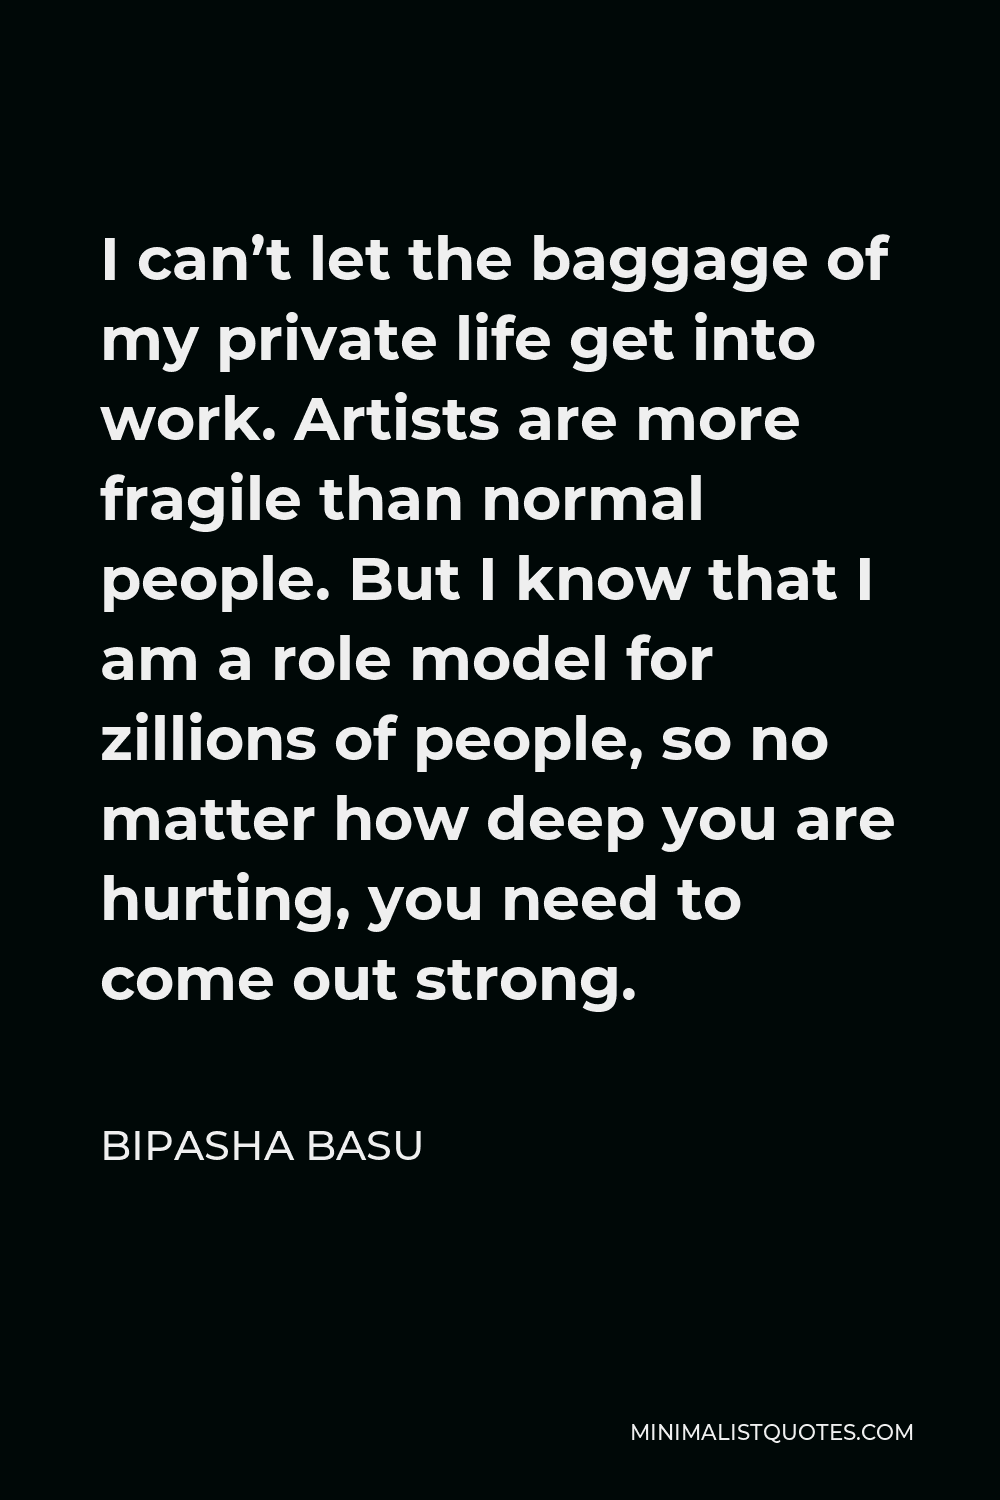 Bipasha Basu Quote - I can’t let the baggage of my private life get into work. Artists are more fragile than normal people. But I know that I am a role model for zillions of people, so no matter how deep you are hurting, you need to come out strong.